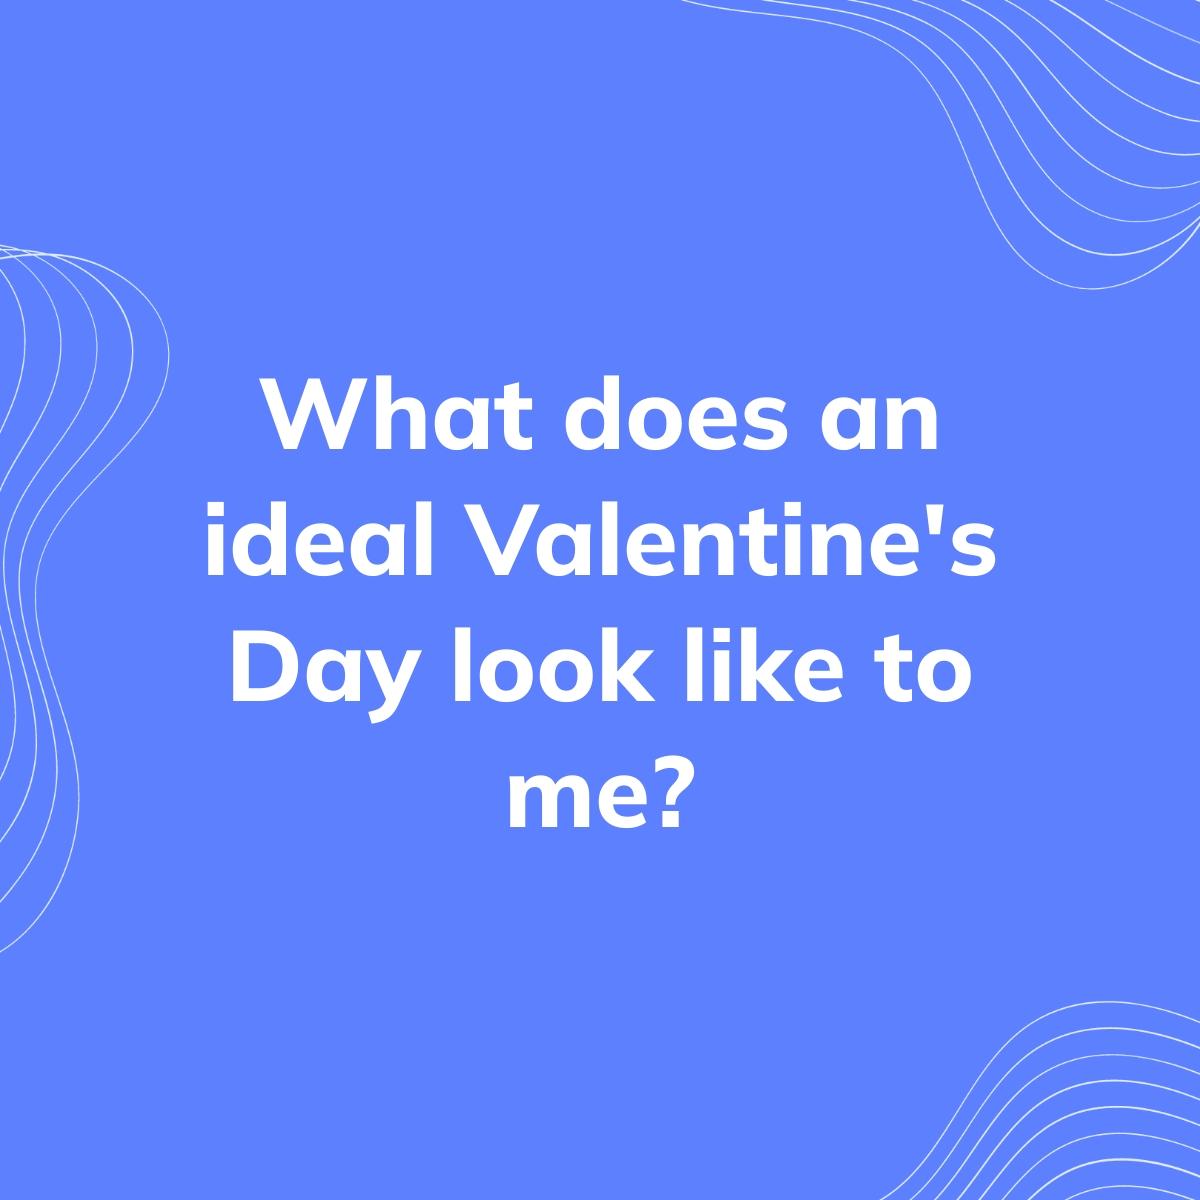 Journal Prompt: What does an ideal Valentine's Day look like to me?